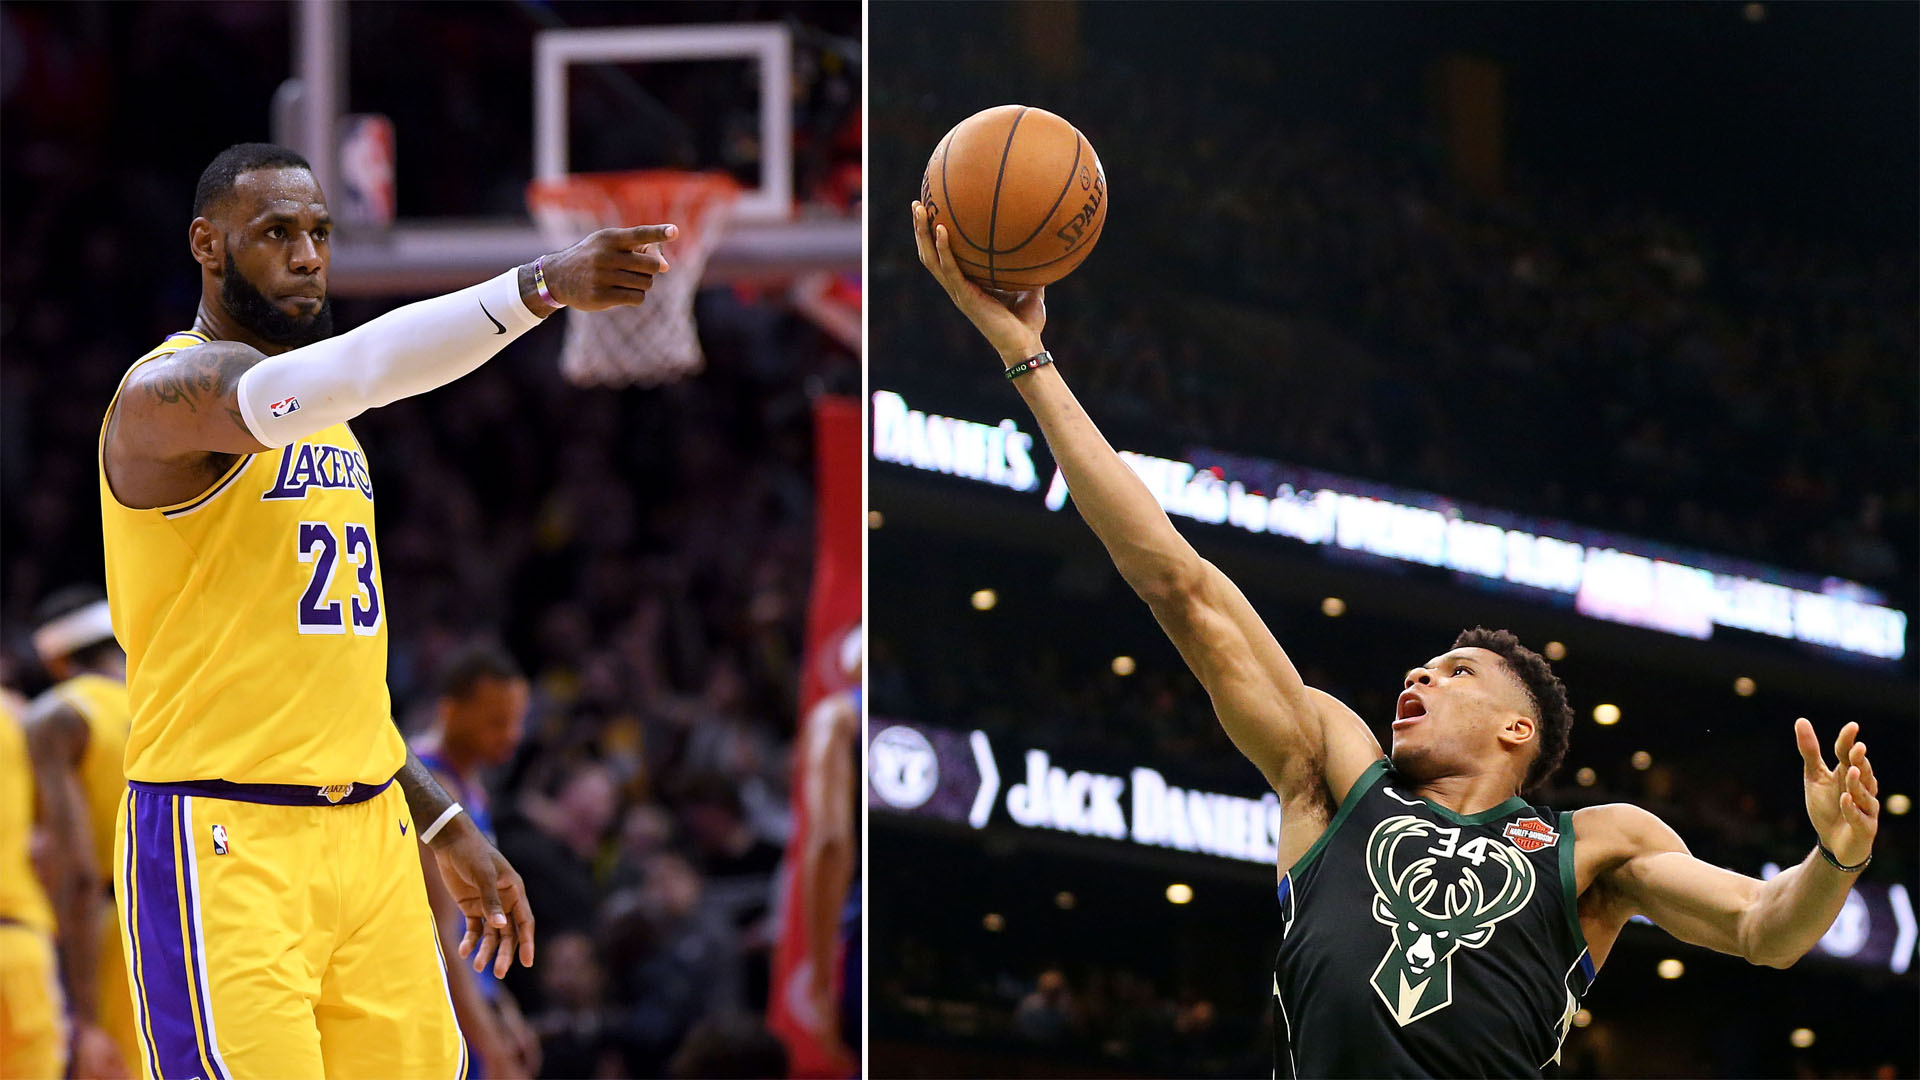 We take a look at the Opta numbers ahead of the 2019 NBA All-Star Game between Team LeBron and Team Giannis.